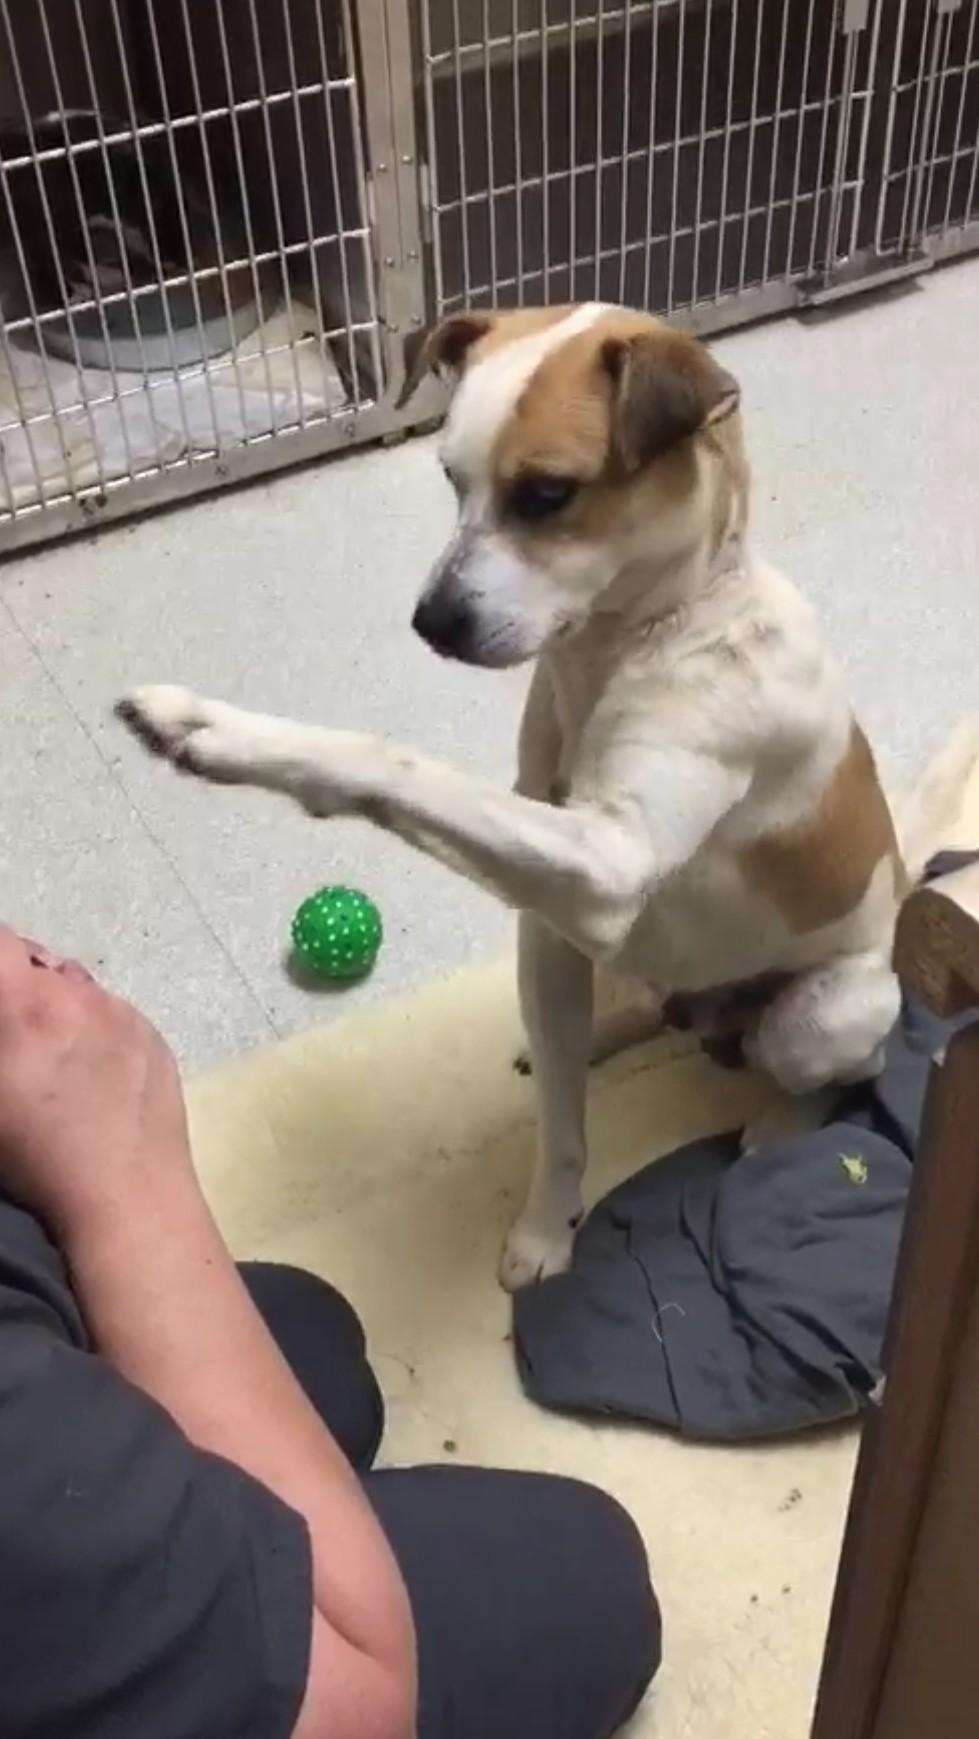 Rescue dog lifting his paw